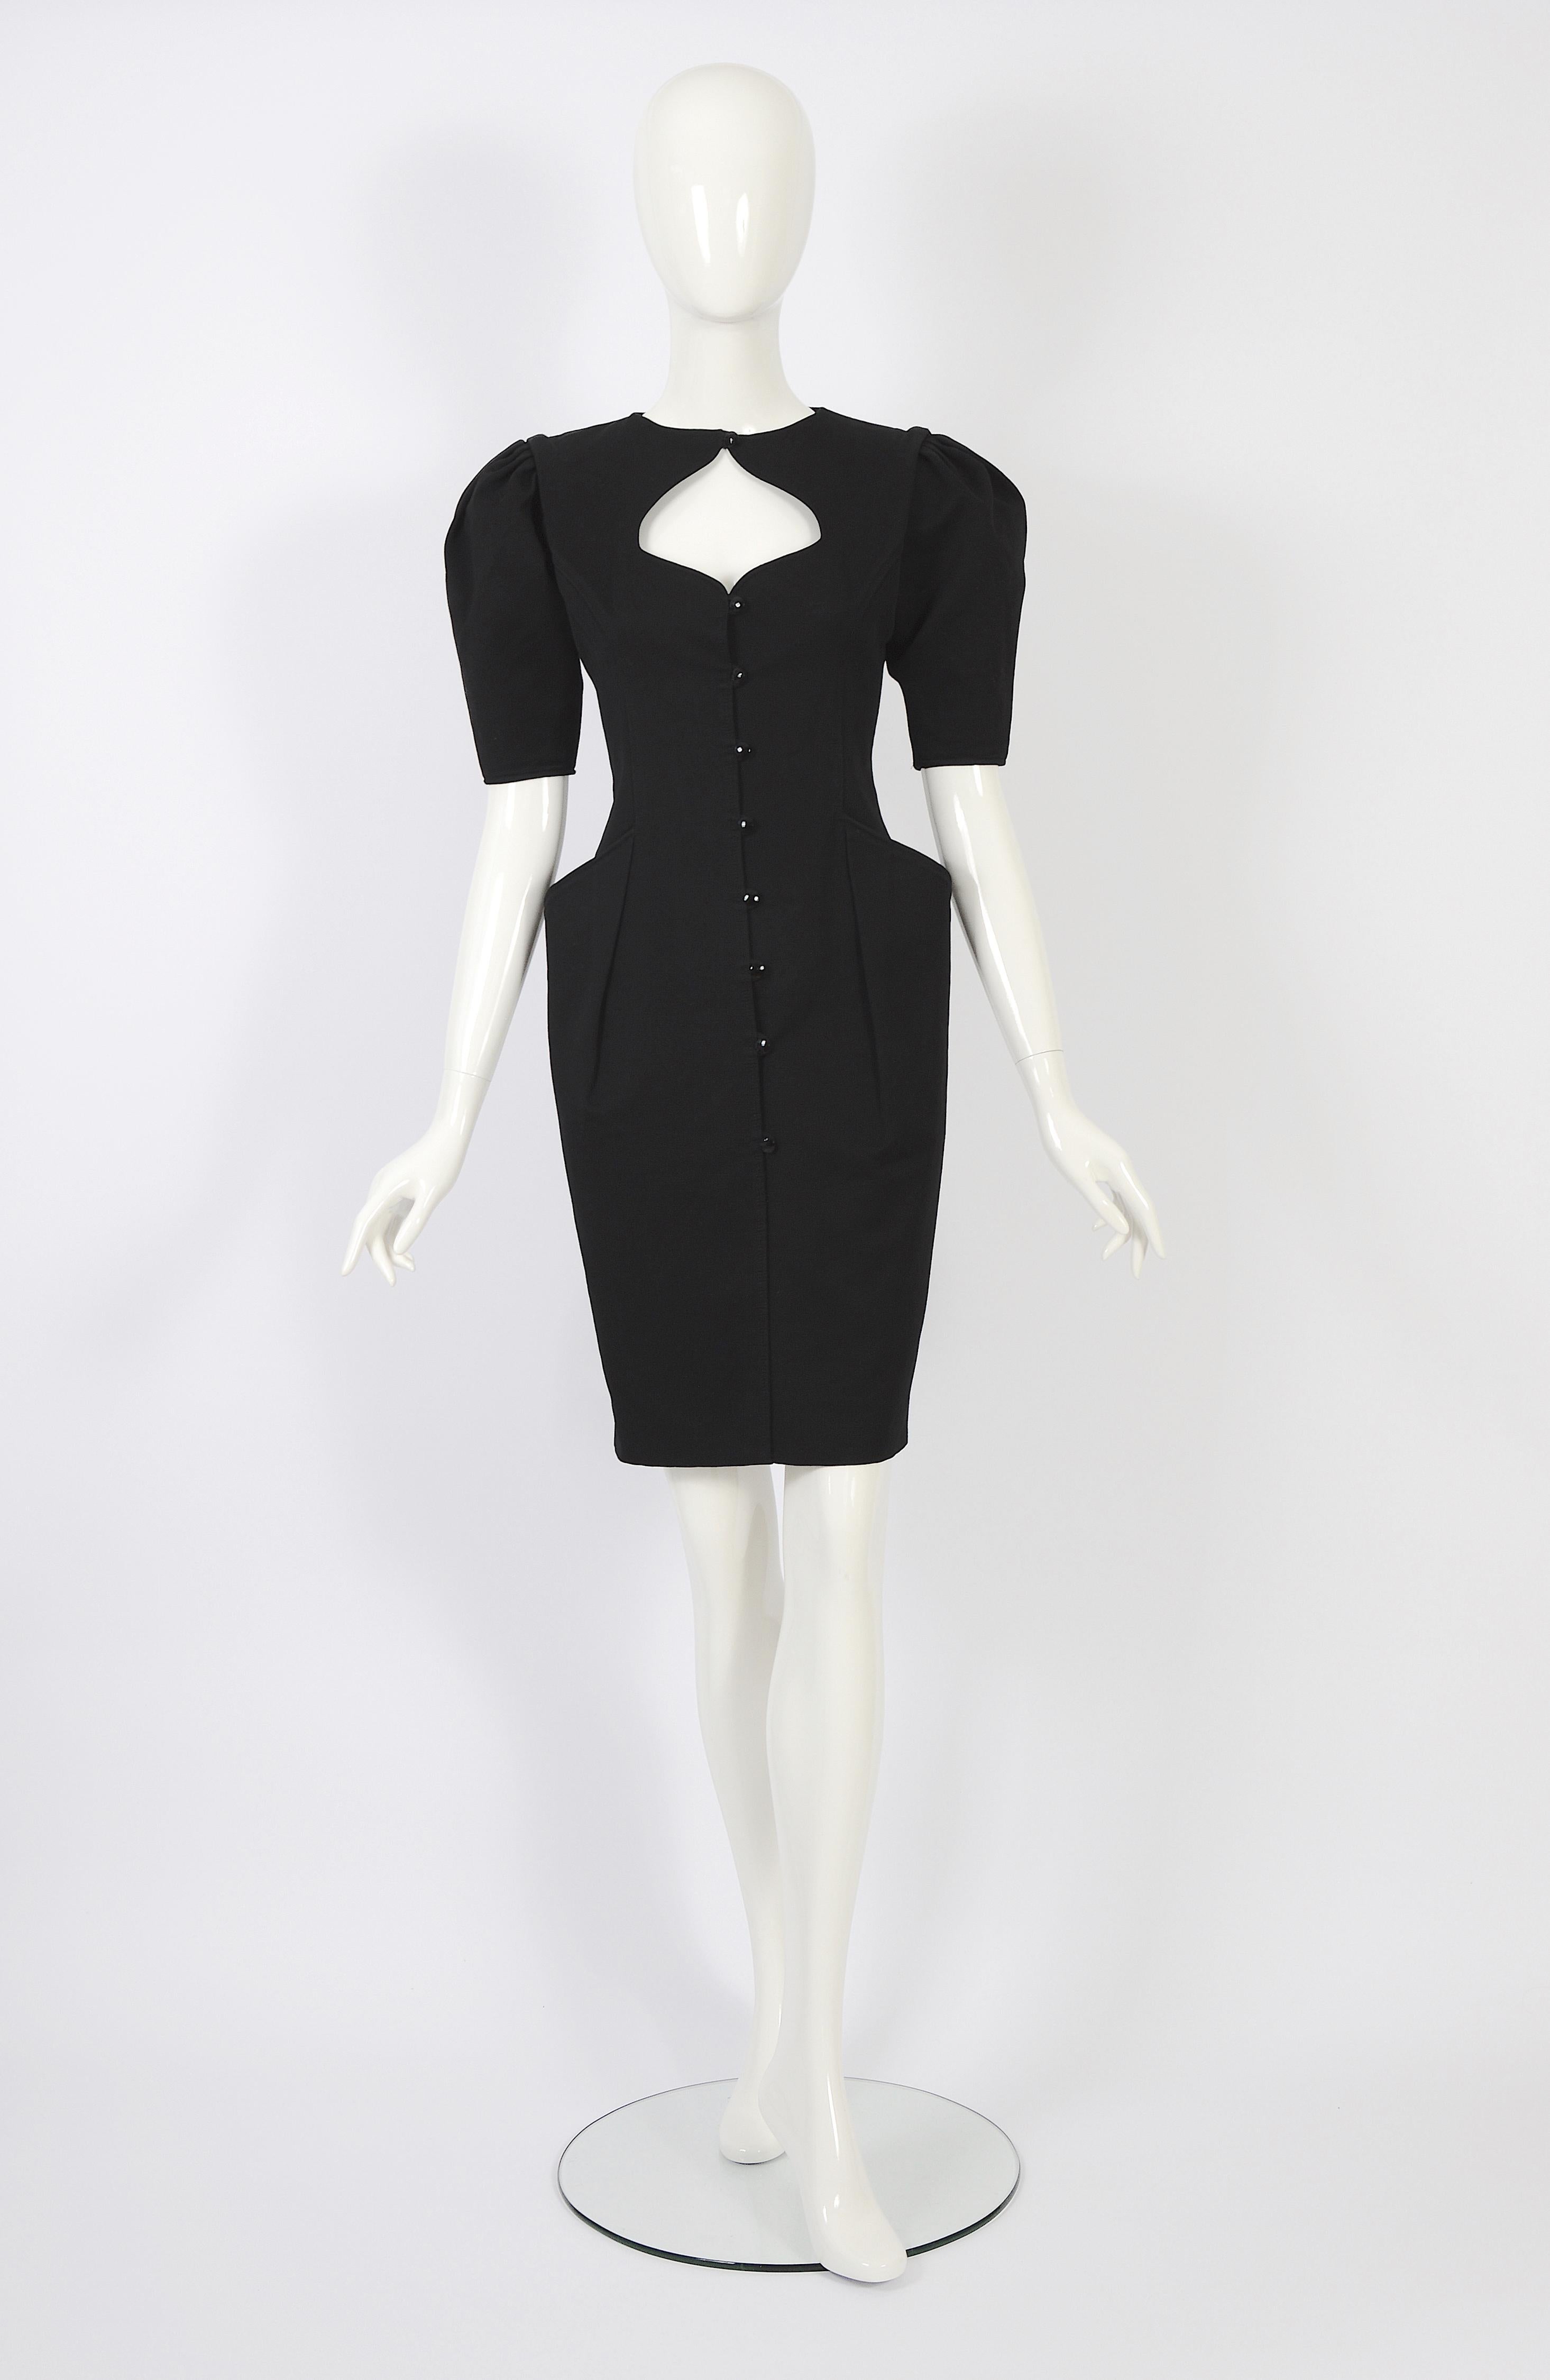 This is an adorable little dress designed by Emanuel Ungaro for Ungaro Parallele. It's a size 36, and our doll is quite tall, so the dress length falls more towards the knee or just below. The dress features elegant black diamond-cut buttons for